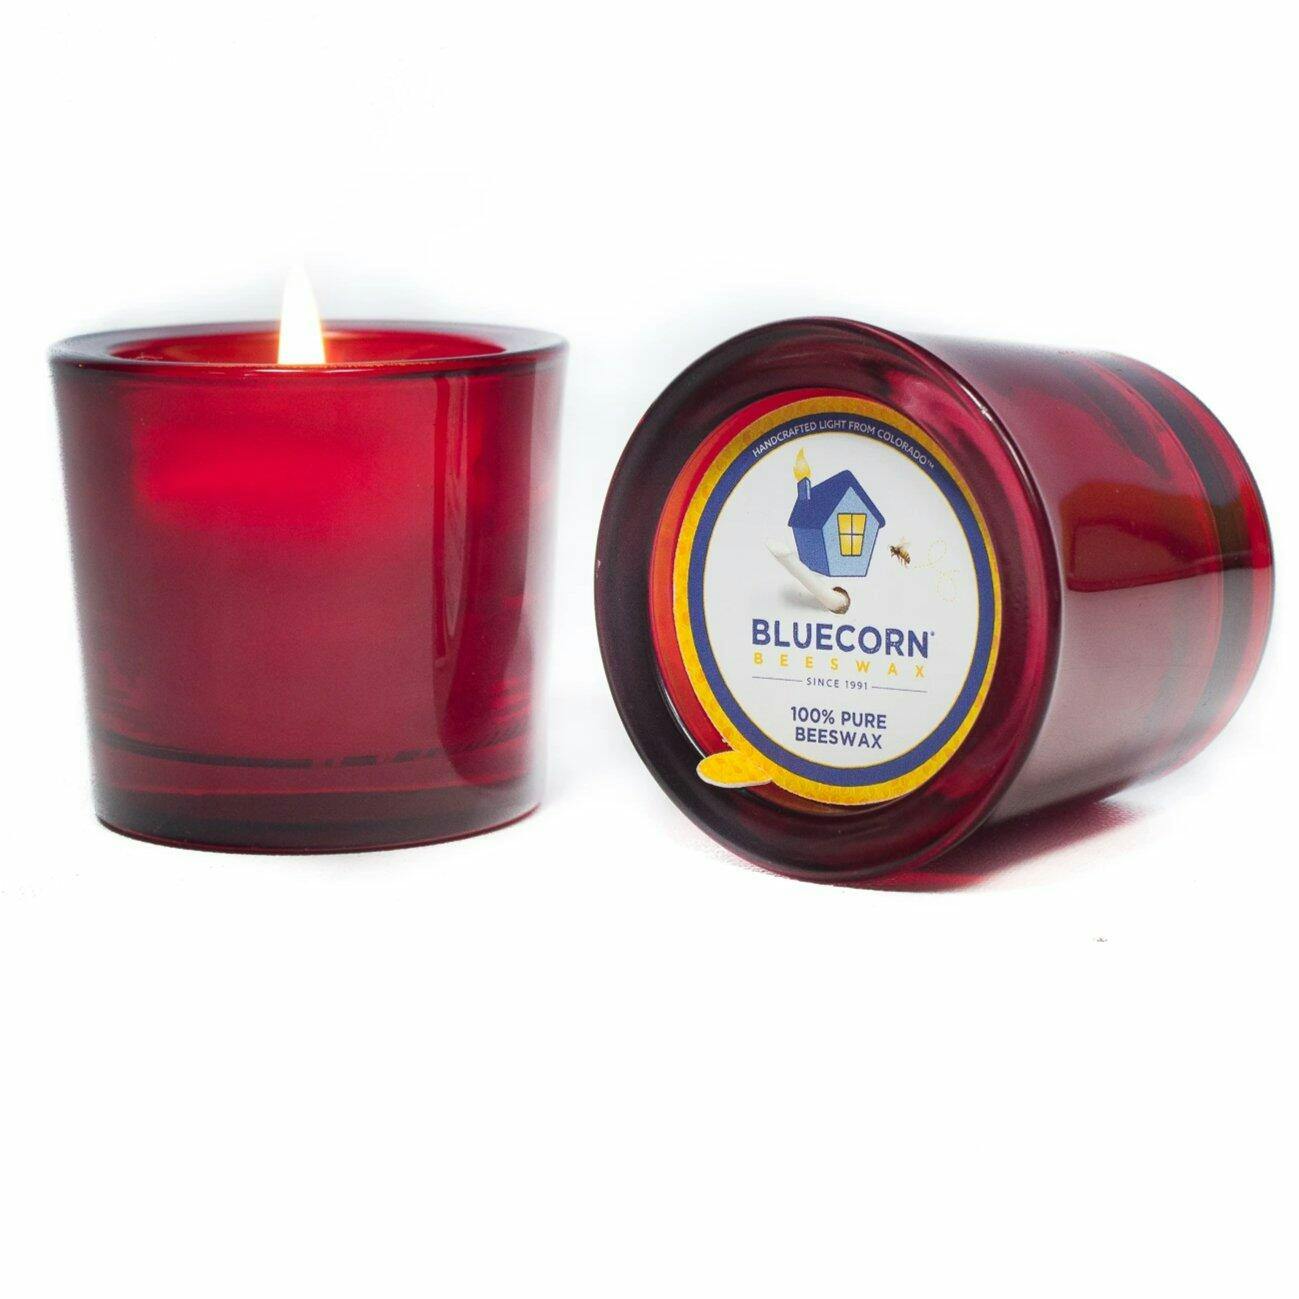 Bluecorn Candles  Reviews on